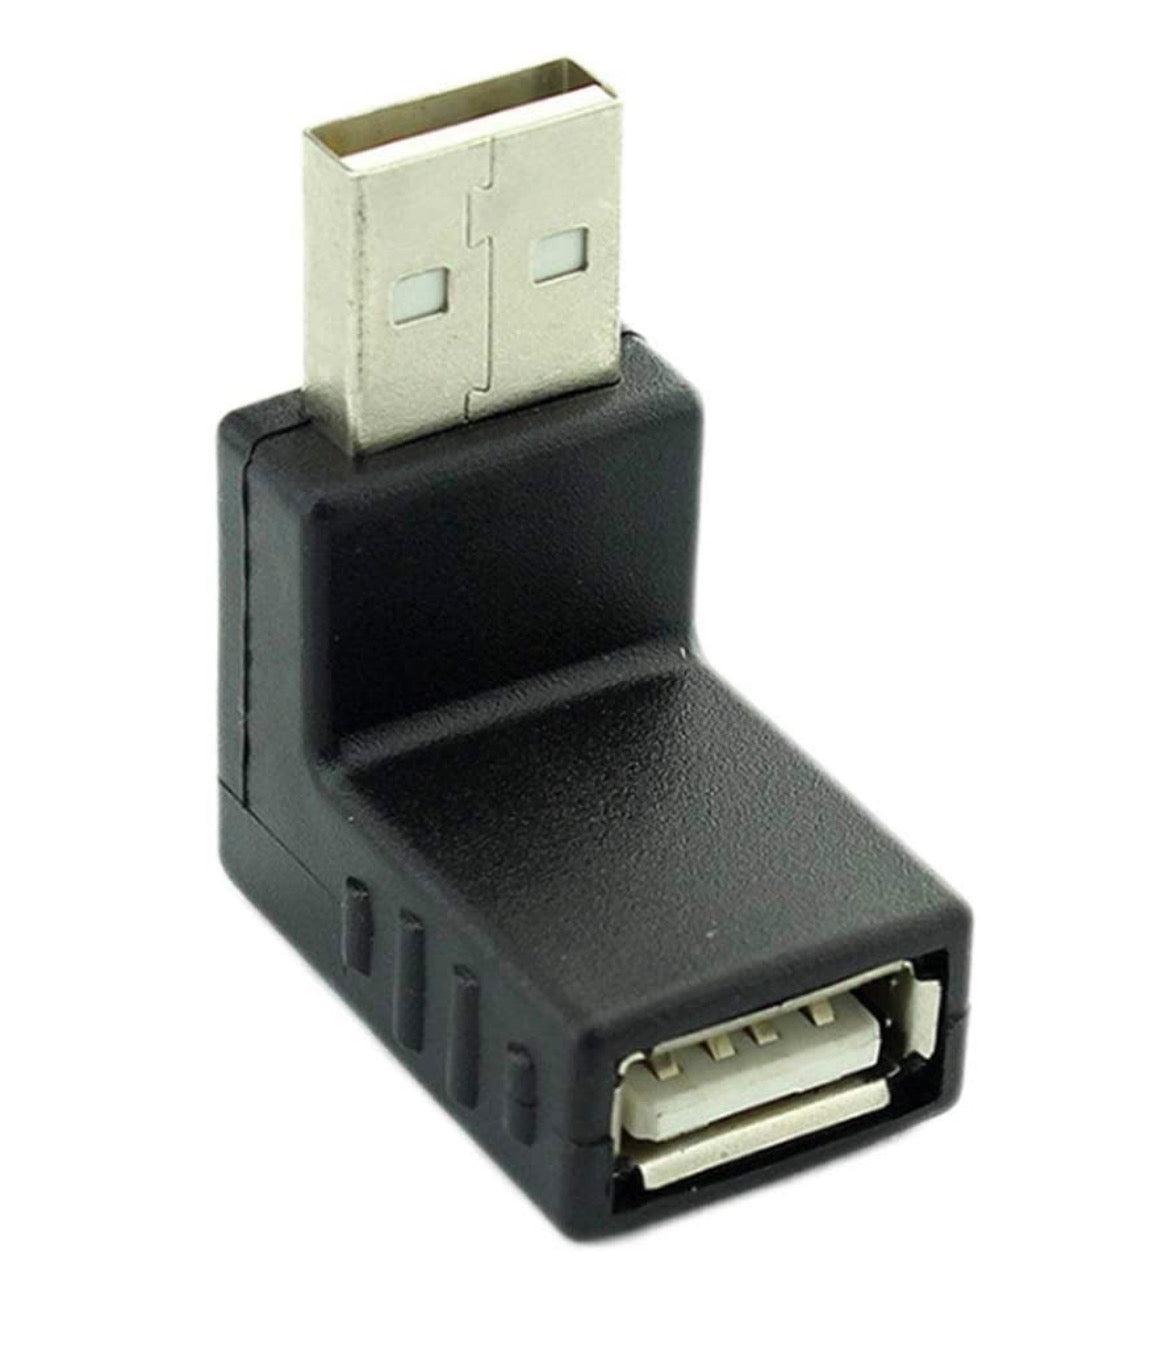 USB 2.0 A Male to Female 90° Angled Extension Adapter